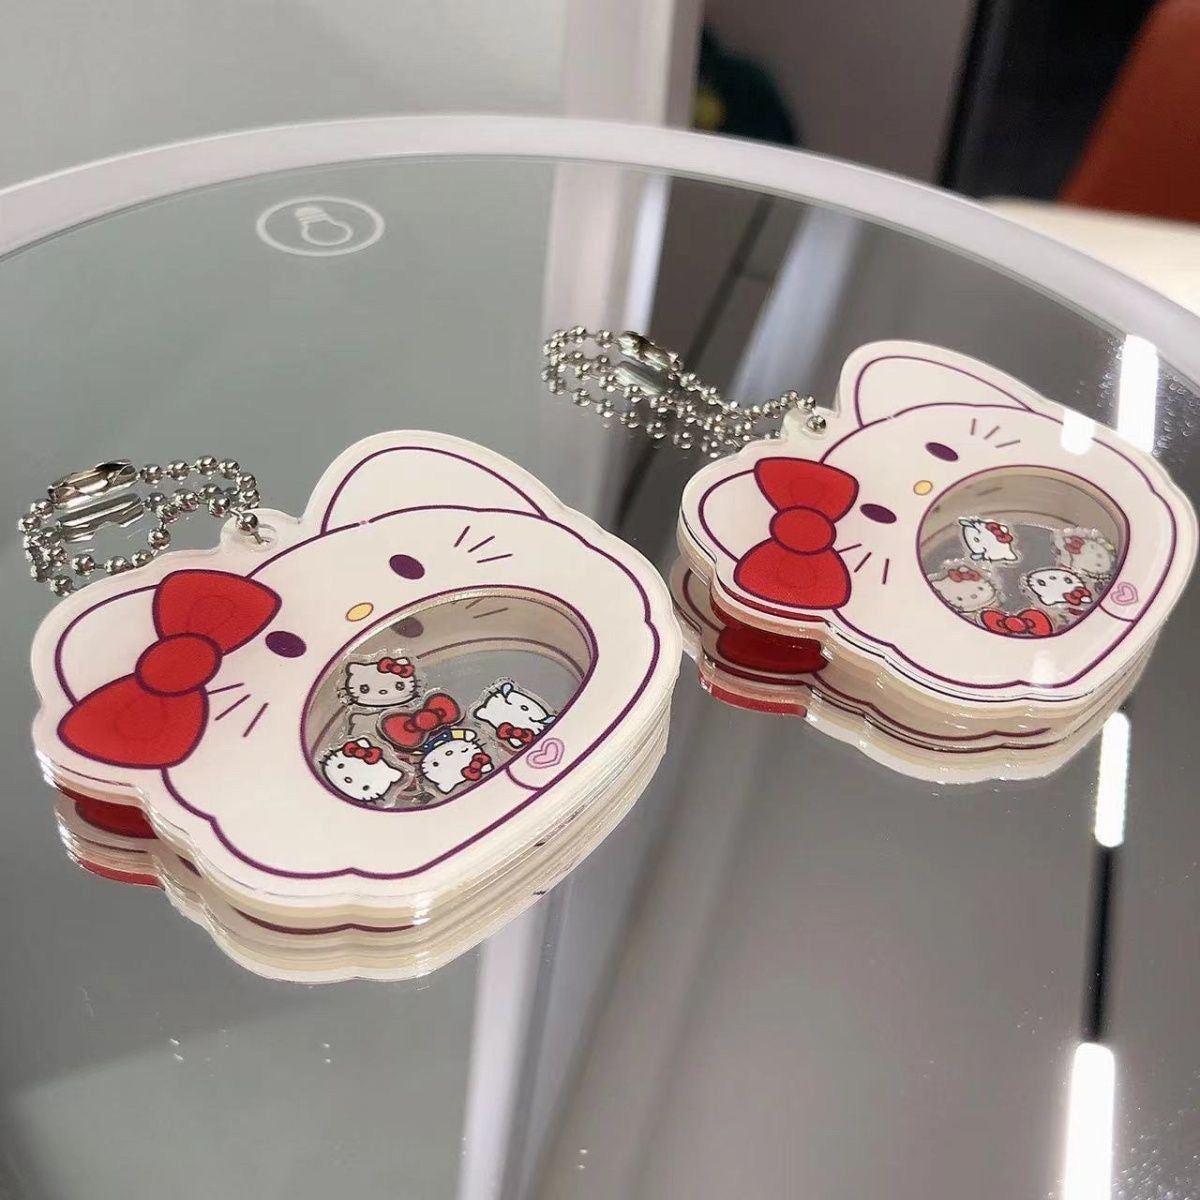 Hellokitty Acrylic Cute Keychain｜2 Count (Pack of 1)